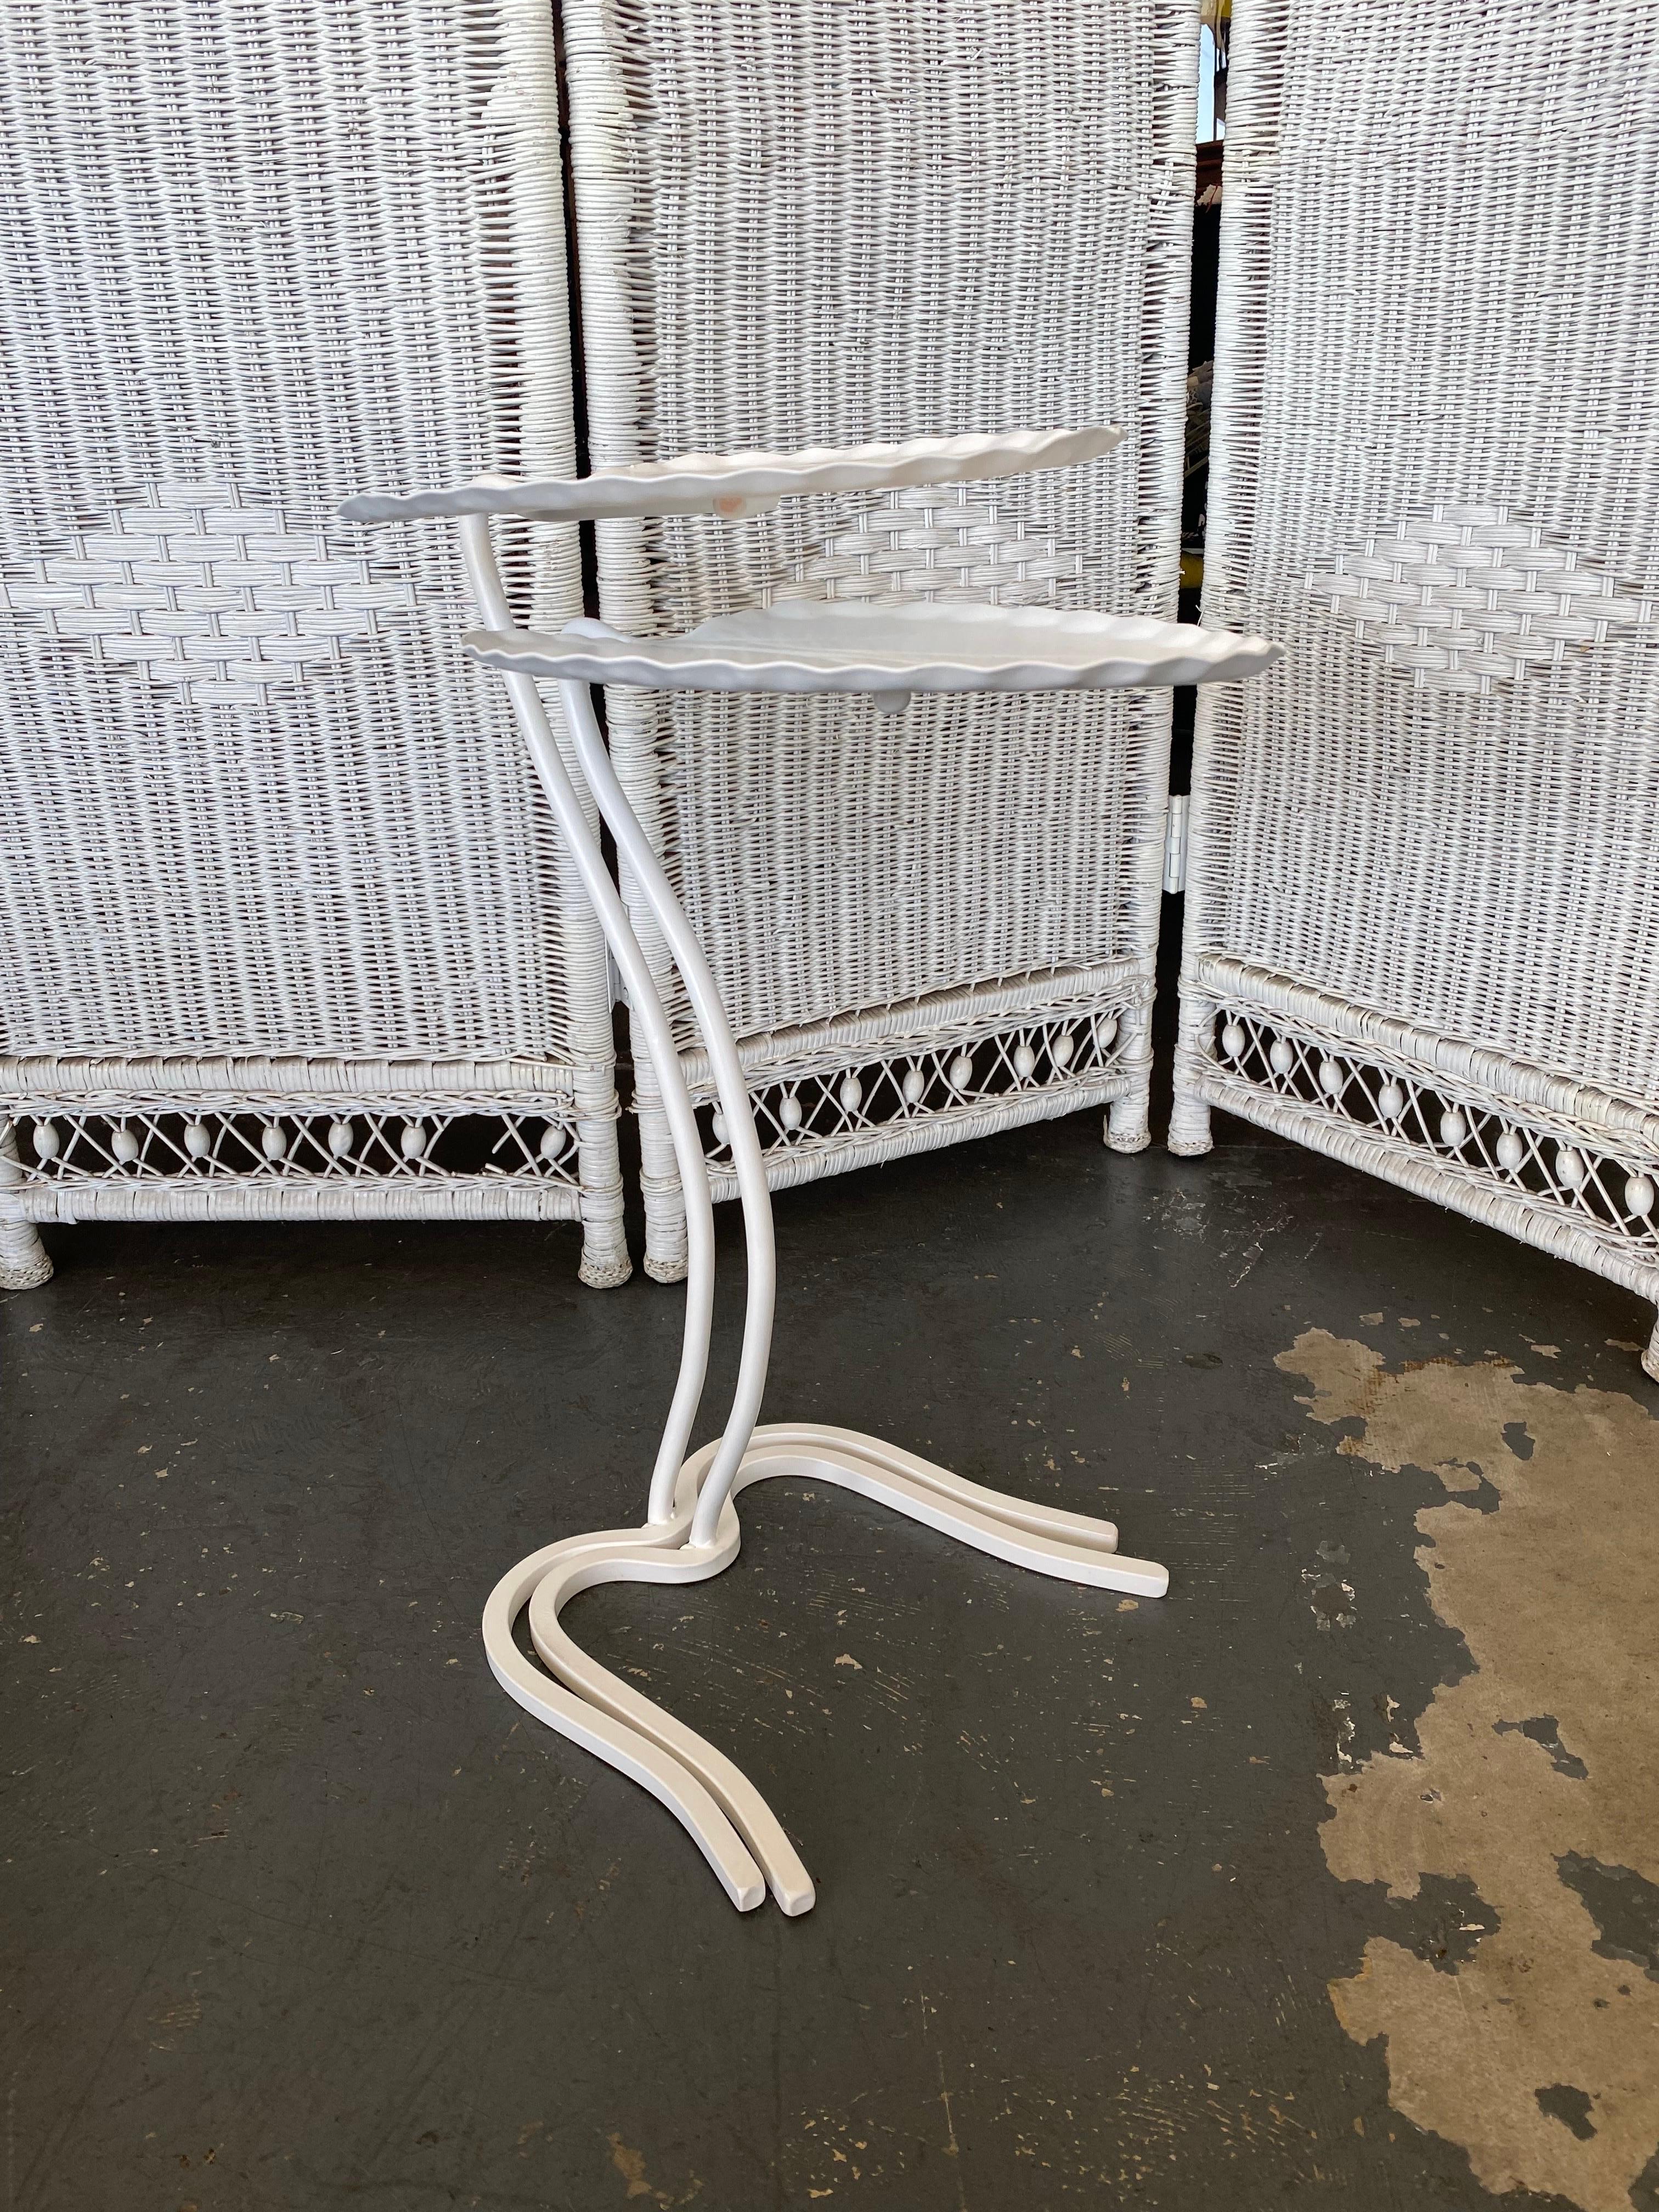 For sale we have a beautiful set of 2 John Salterini lily pad or leaf shaped nesting tables in white. 

Both tables were professionally powder coated and are in pristine condition minus a few minor dents. See pictures for details.

Dimensions of the